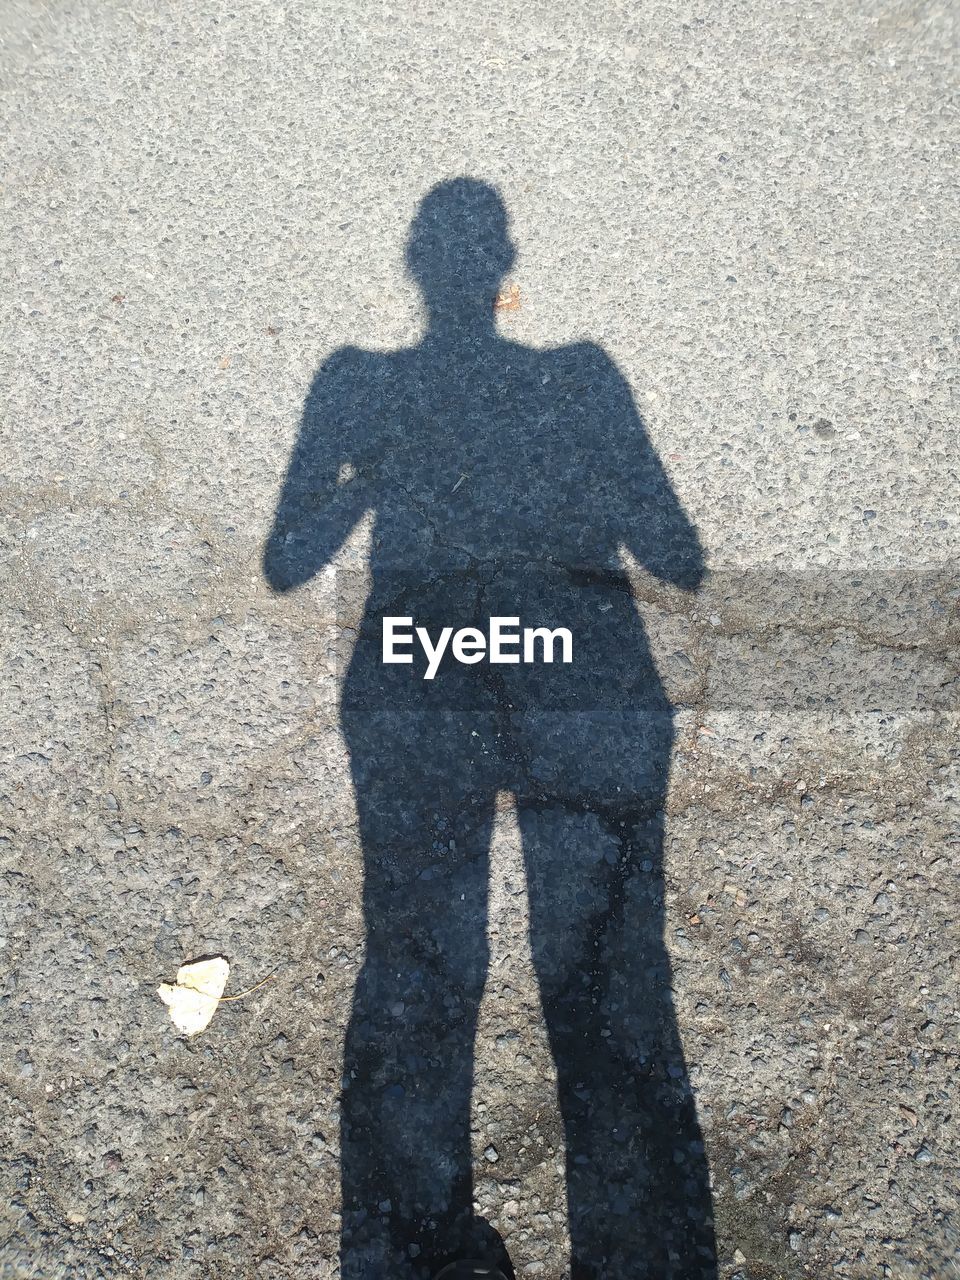 SHADOW OF MAN STANDING ON GROUND